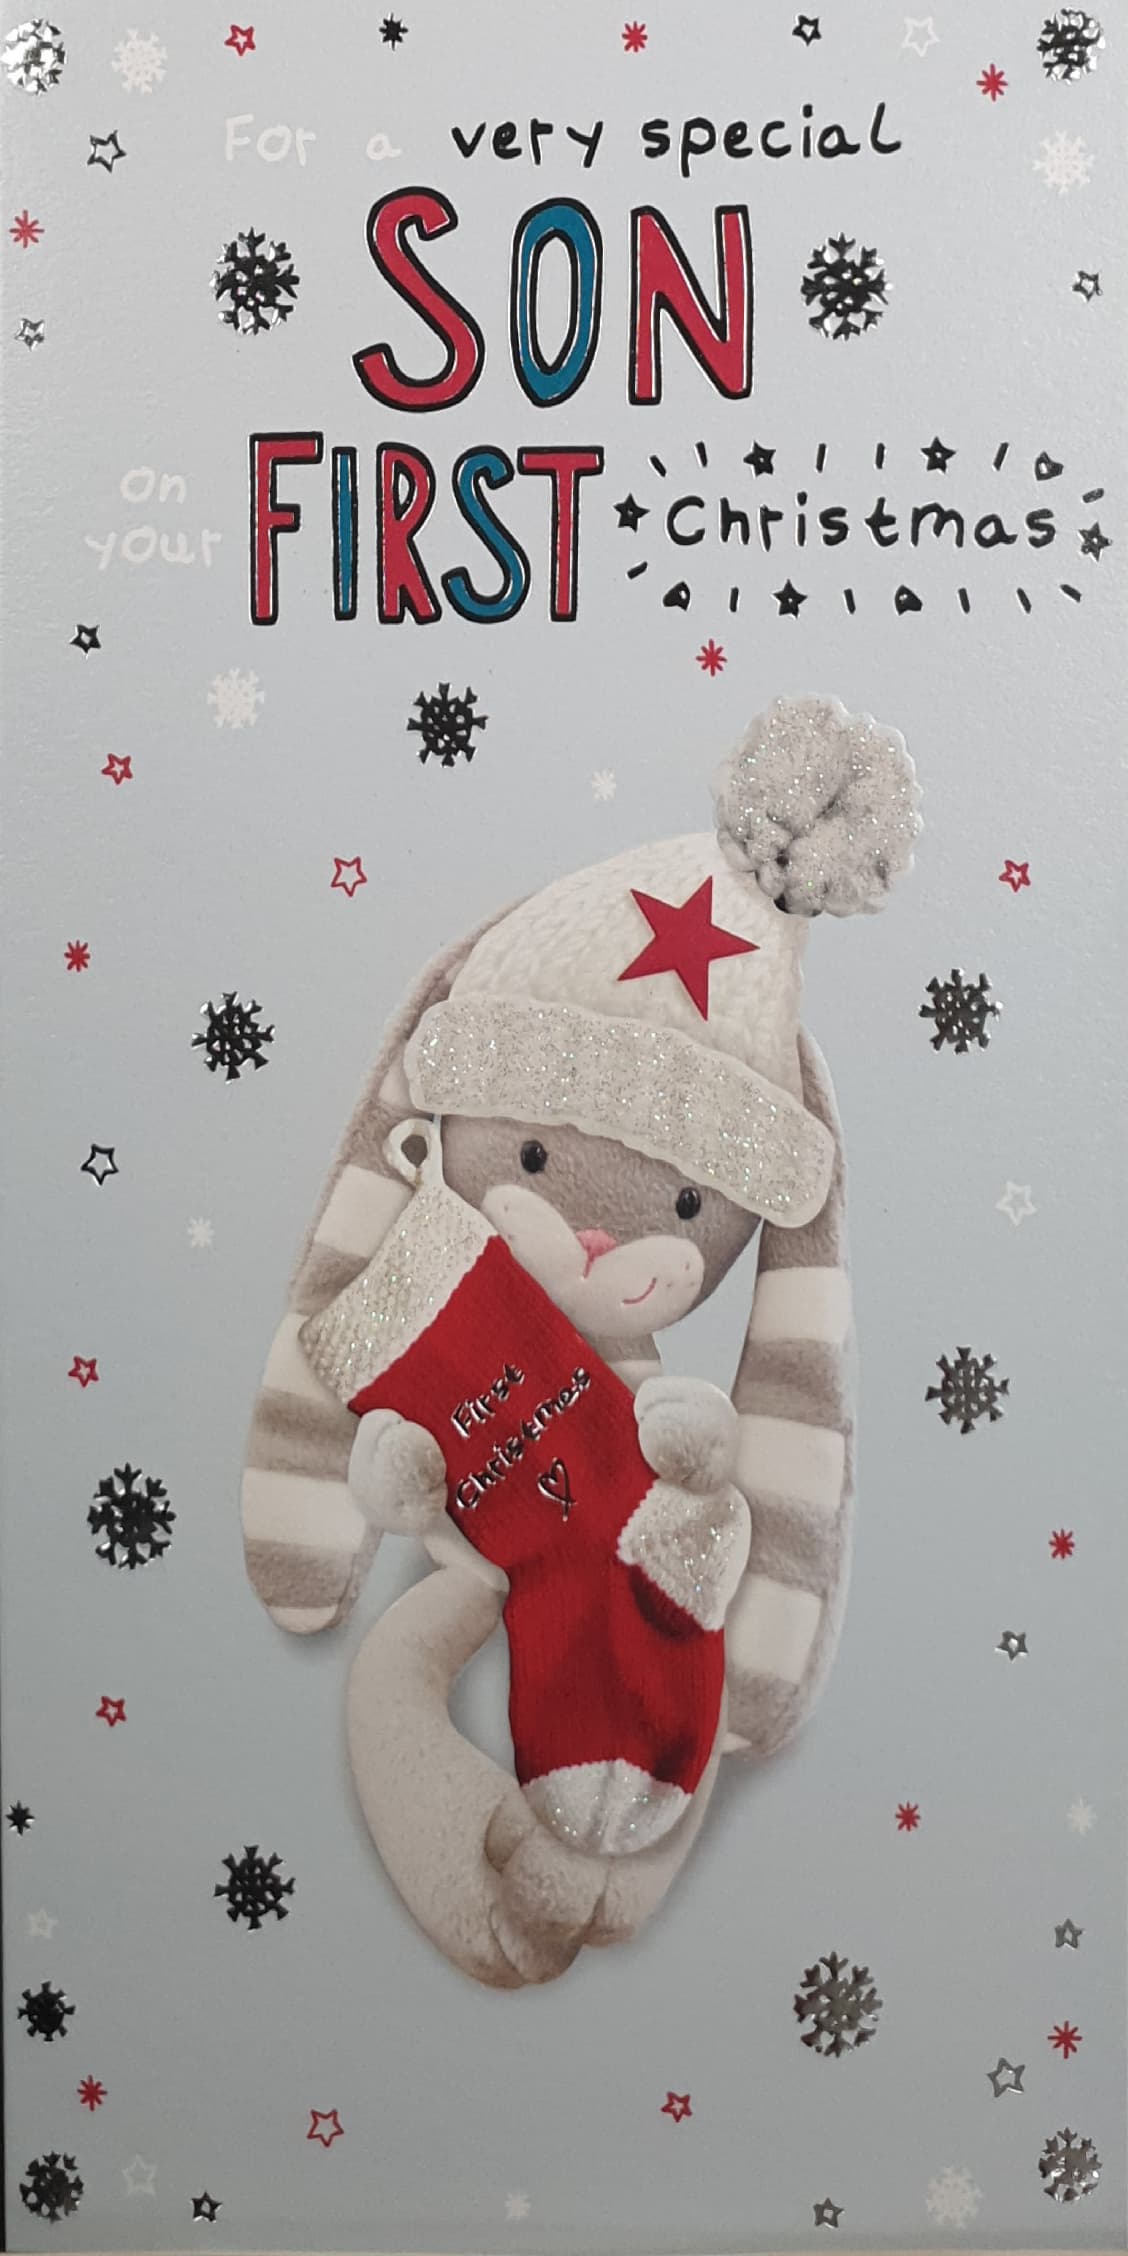 Son First Christmas Card - Cute Bunny Holding Christmas Stocking